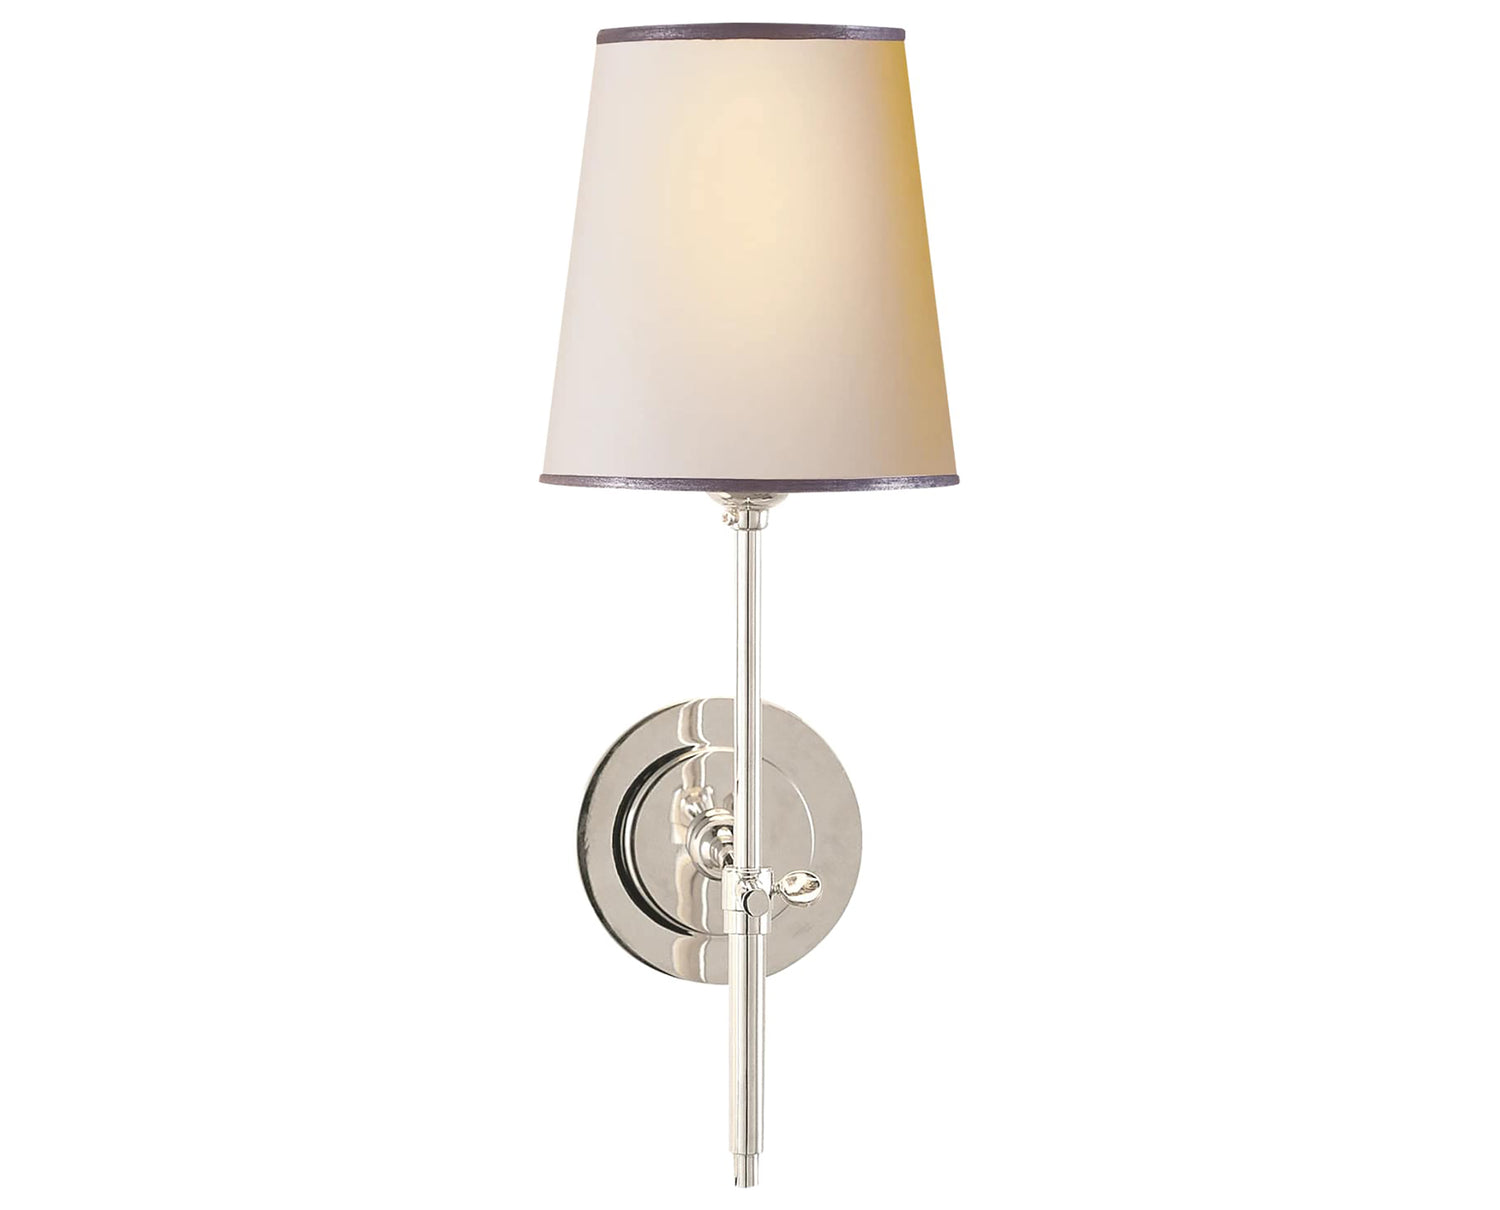 Polished Nickel & Natural Paper with Silver Trim | Bryant Sconce - Natural Paper Shade | Valley Ridge Furniture